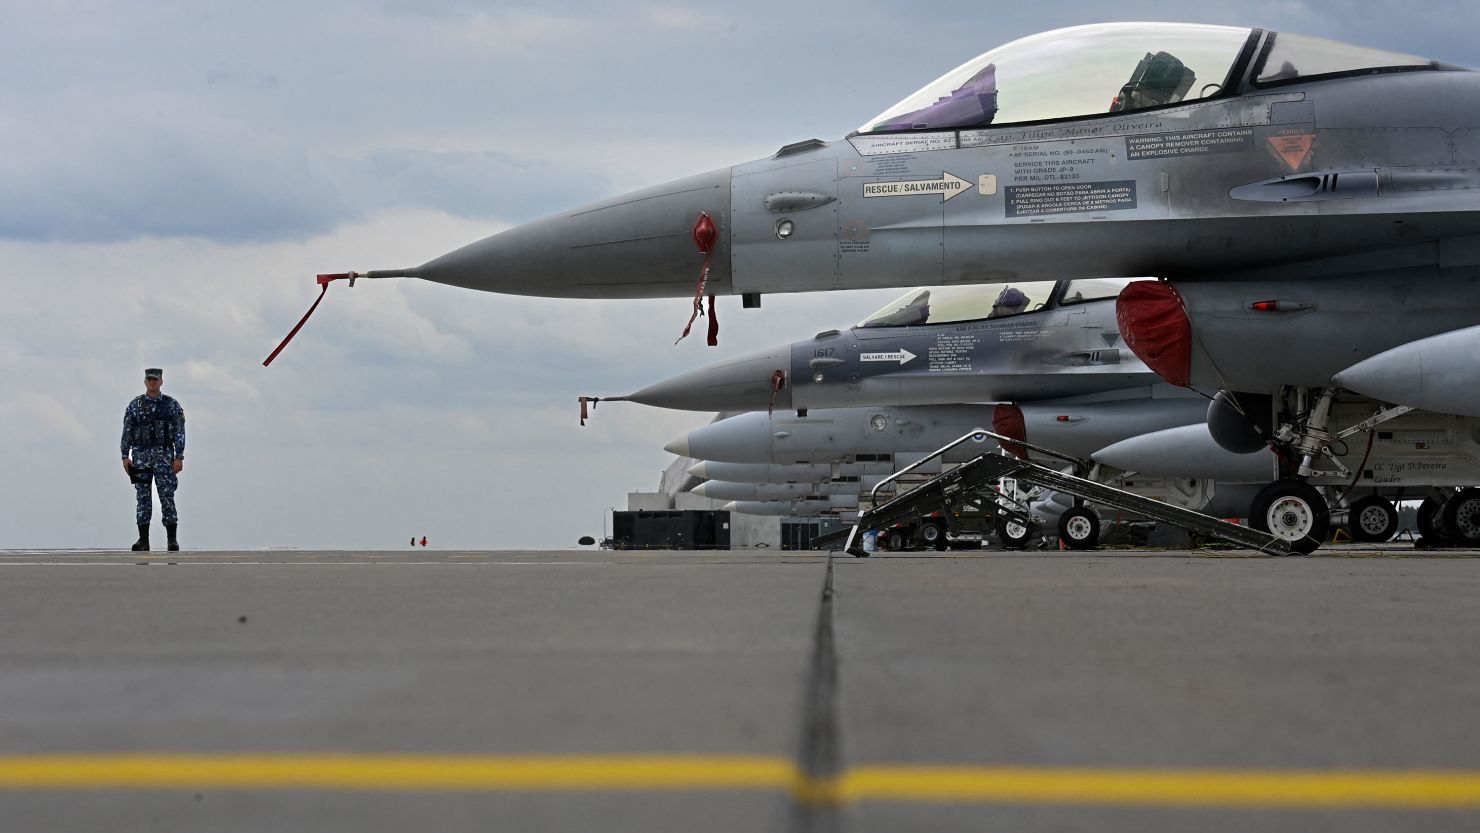 Portugese Air Force and Romanian Air Force F-16 jetfighters sit on the tarmac of Siauliai airbase in Lithuania during the NATO exercise as part of the NATO Air Policing mission, on July 4, 2023.